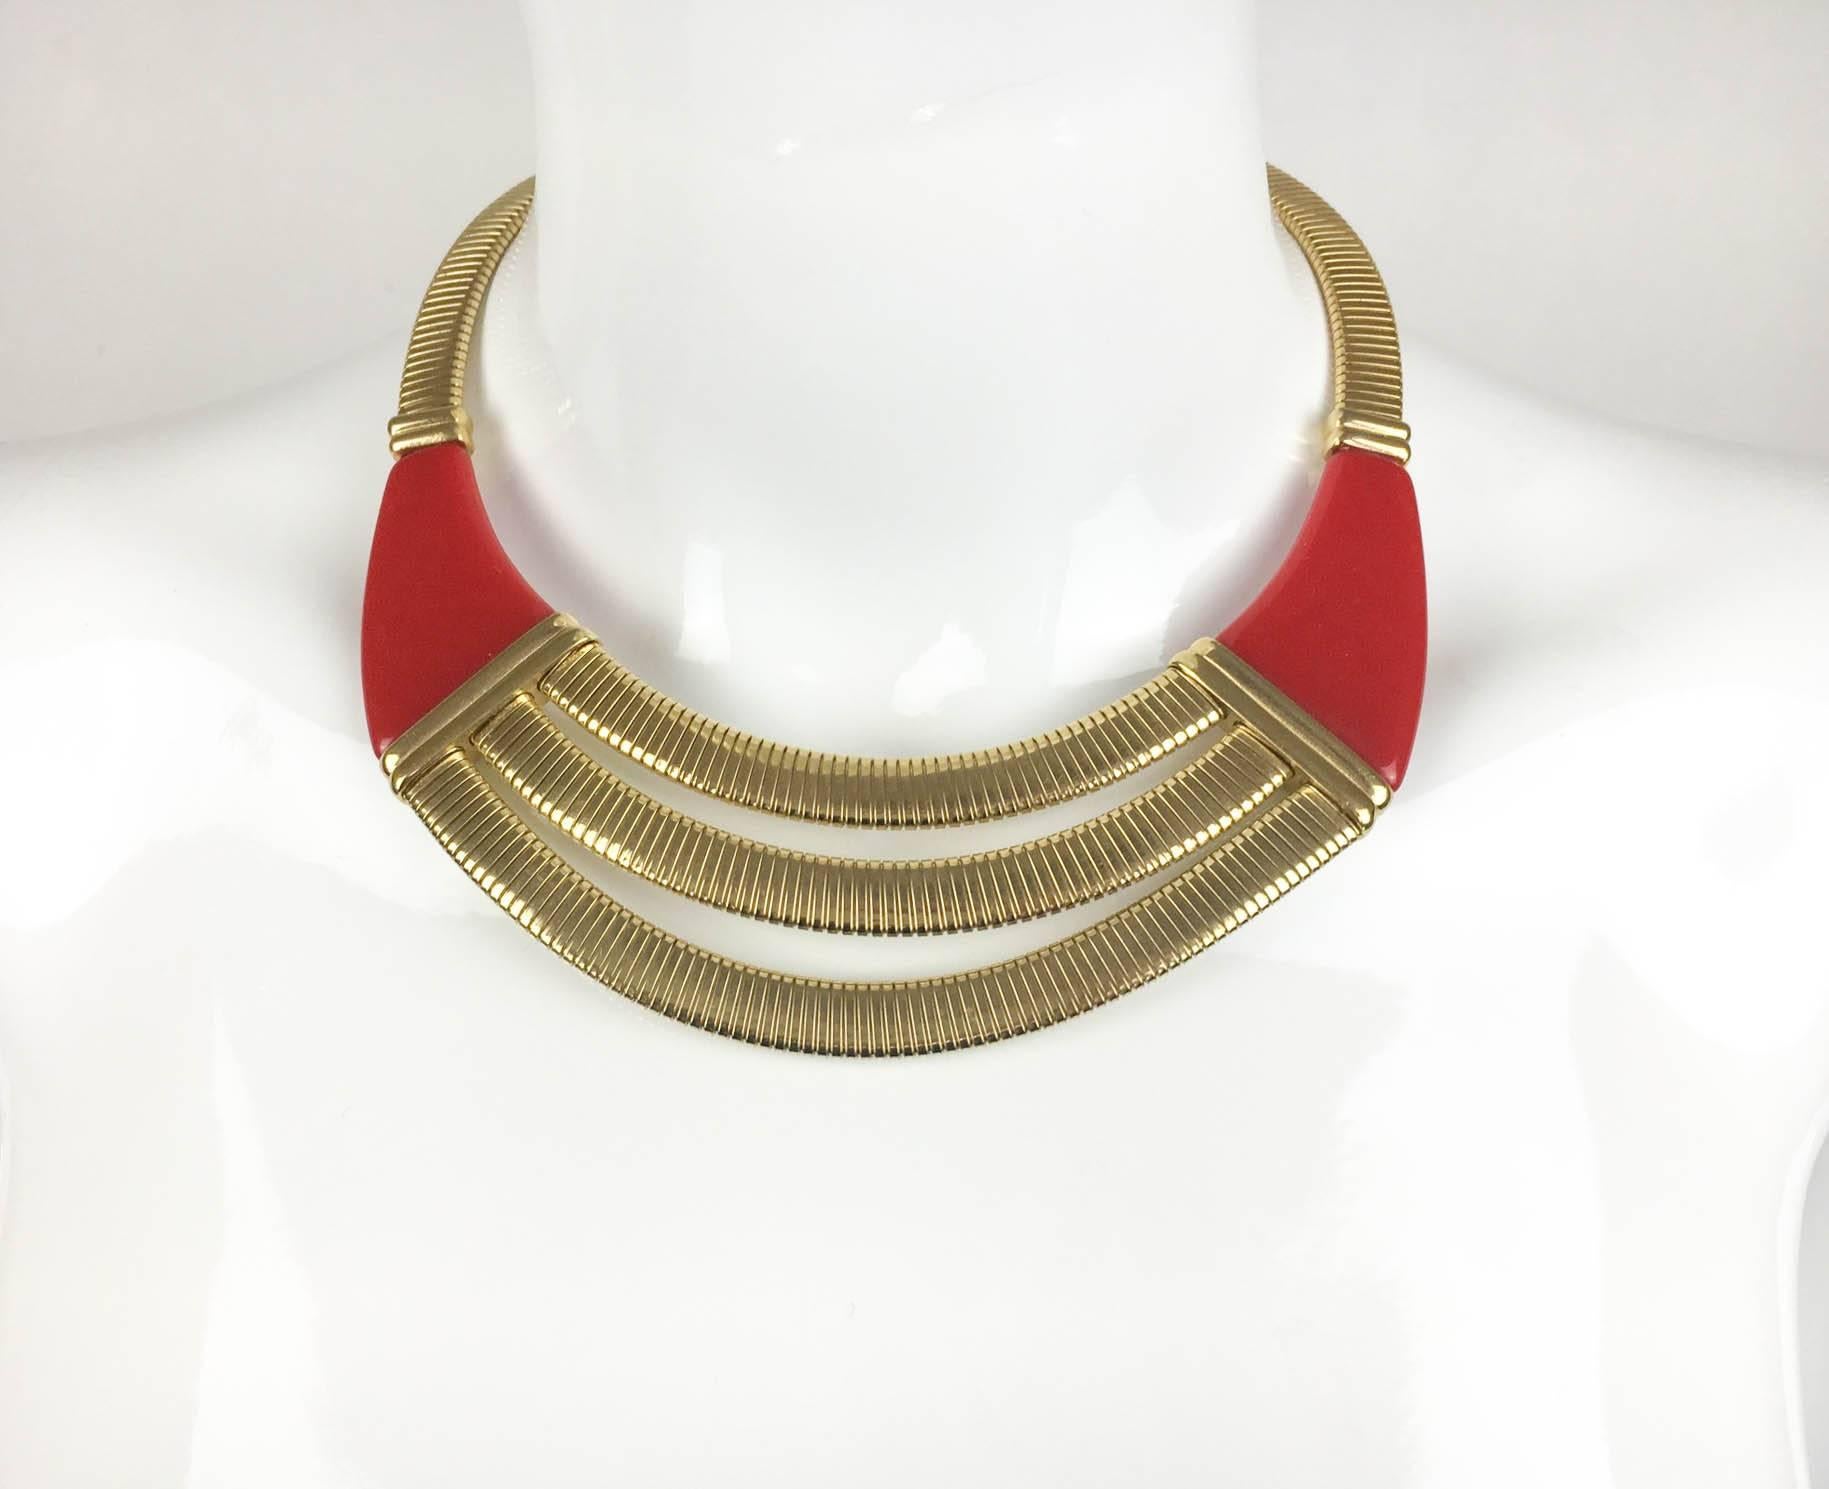 Women's or Men's Givenchy Art Deco Inspired Necklace - 1970s